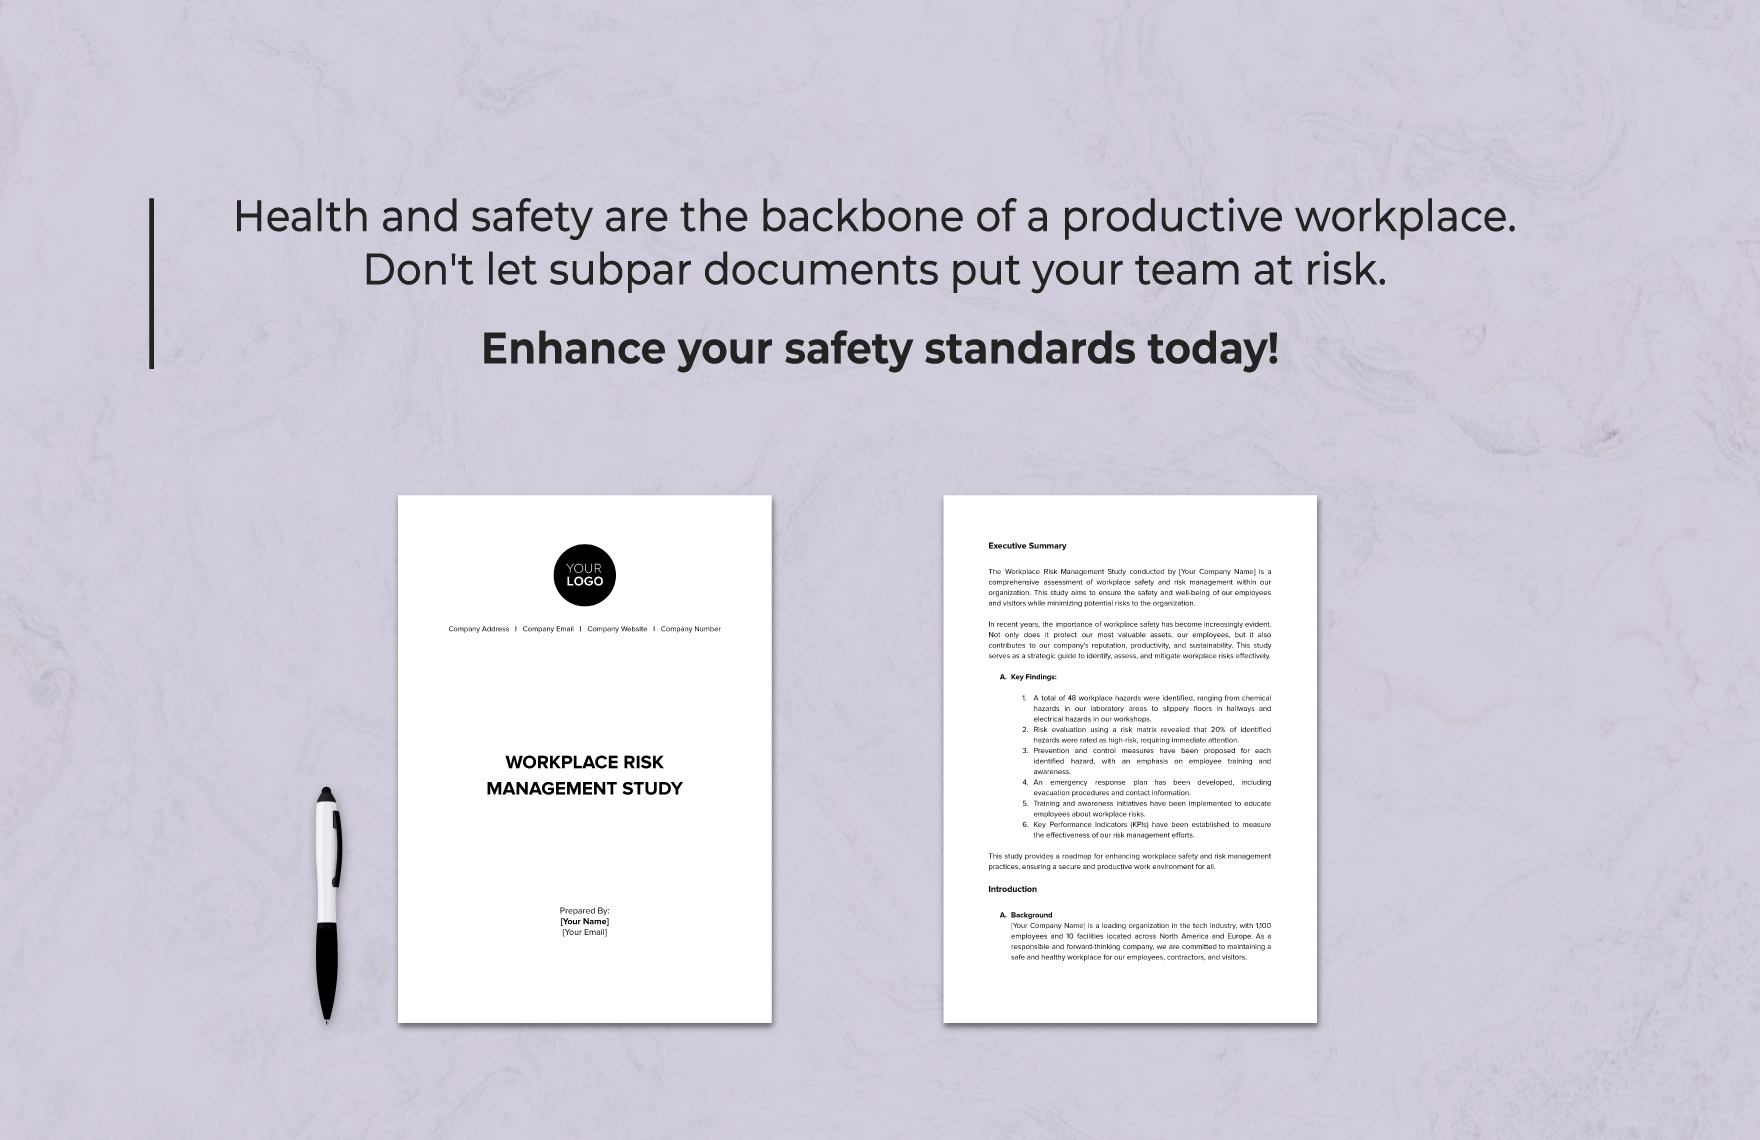 Workplace Risk Management Study Template